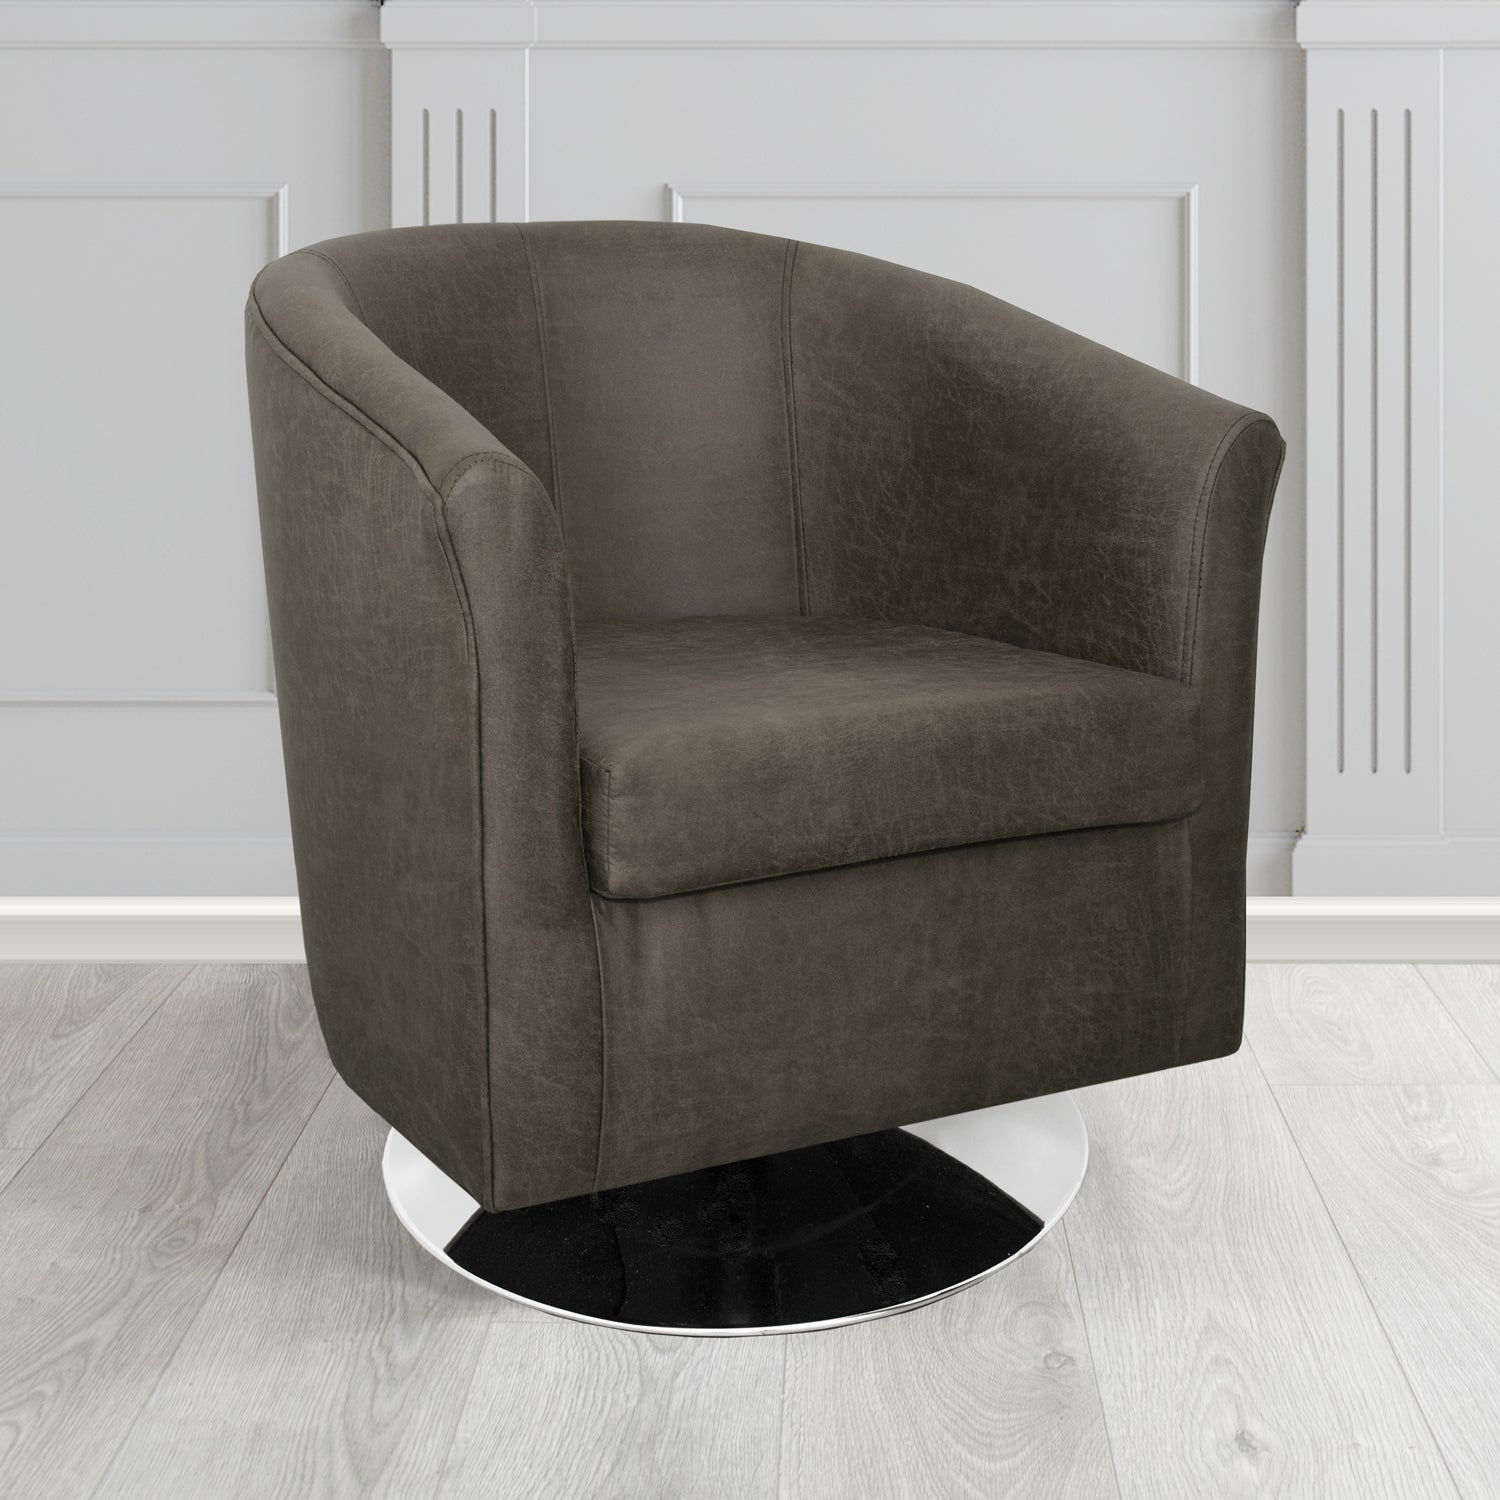 Tuscany Swivel Tub Chair in Nevada Charcoal Faux Leather - The Tub Chair Shop